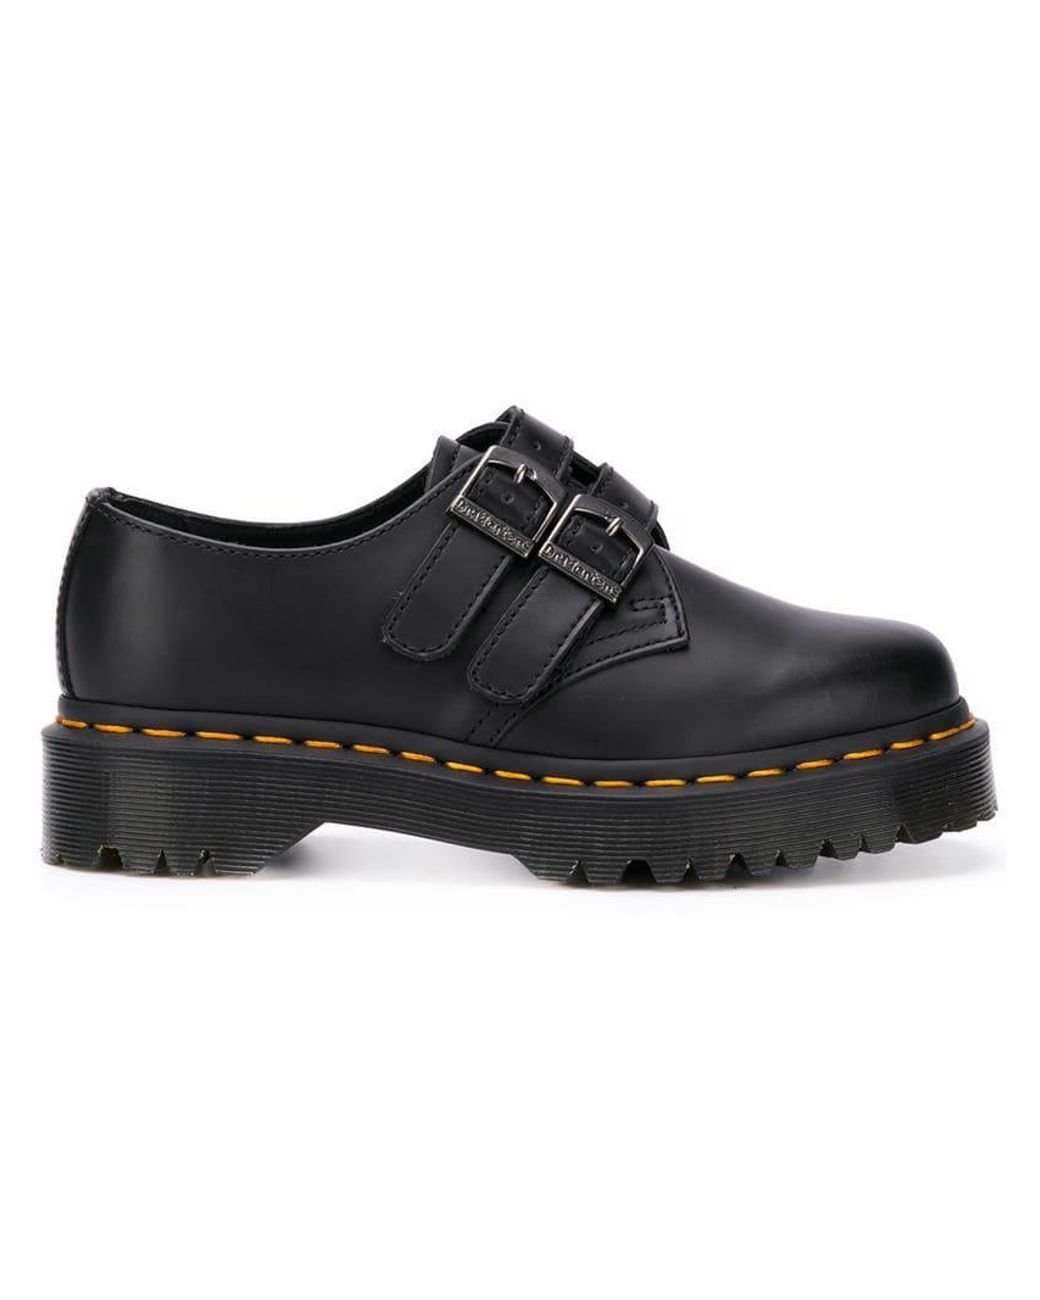 Dr. Martens Double Buckle Shoes in Black | Lyst